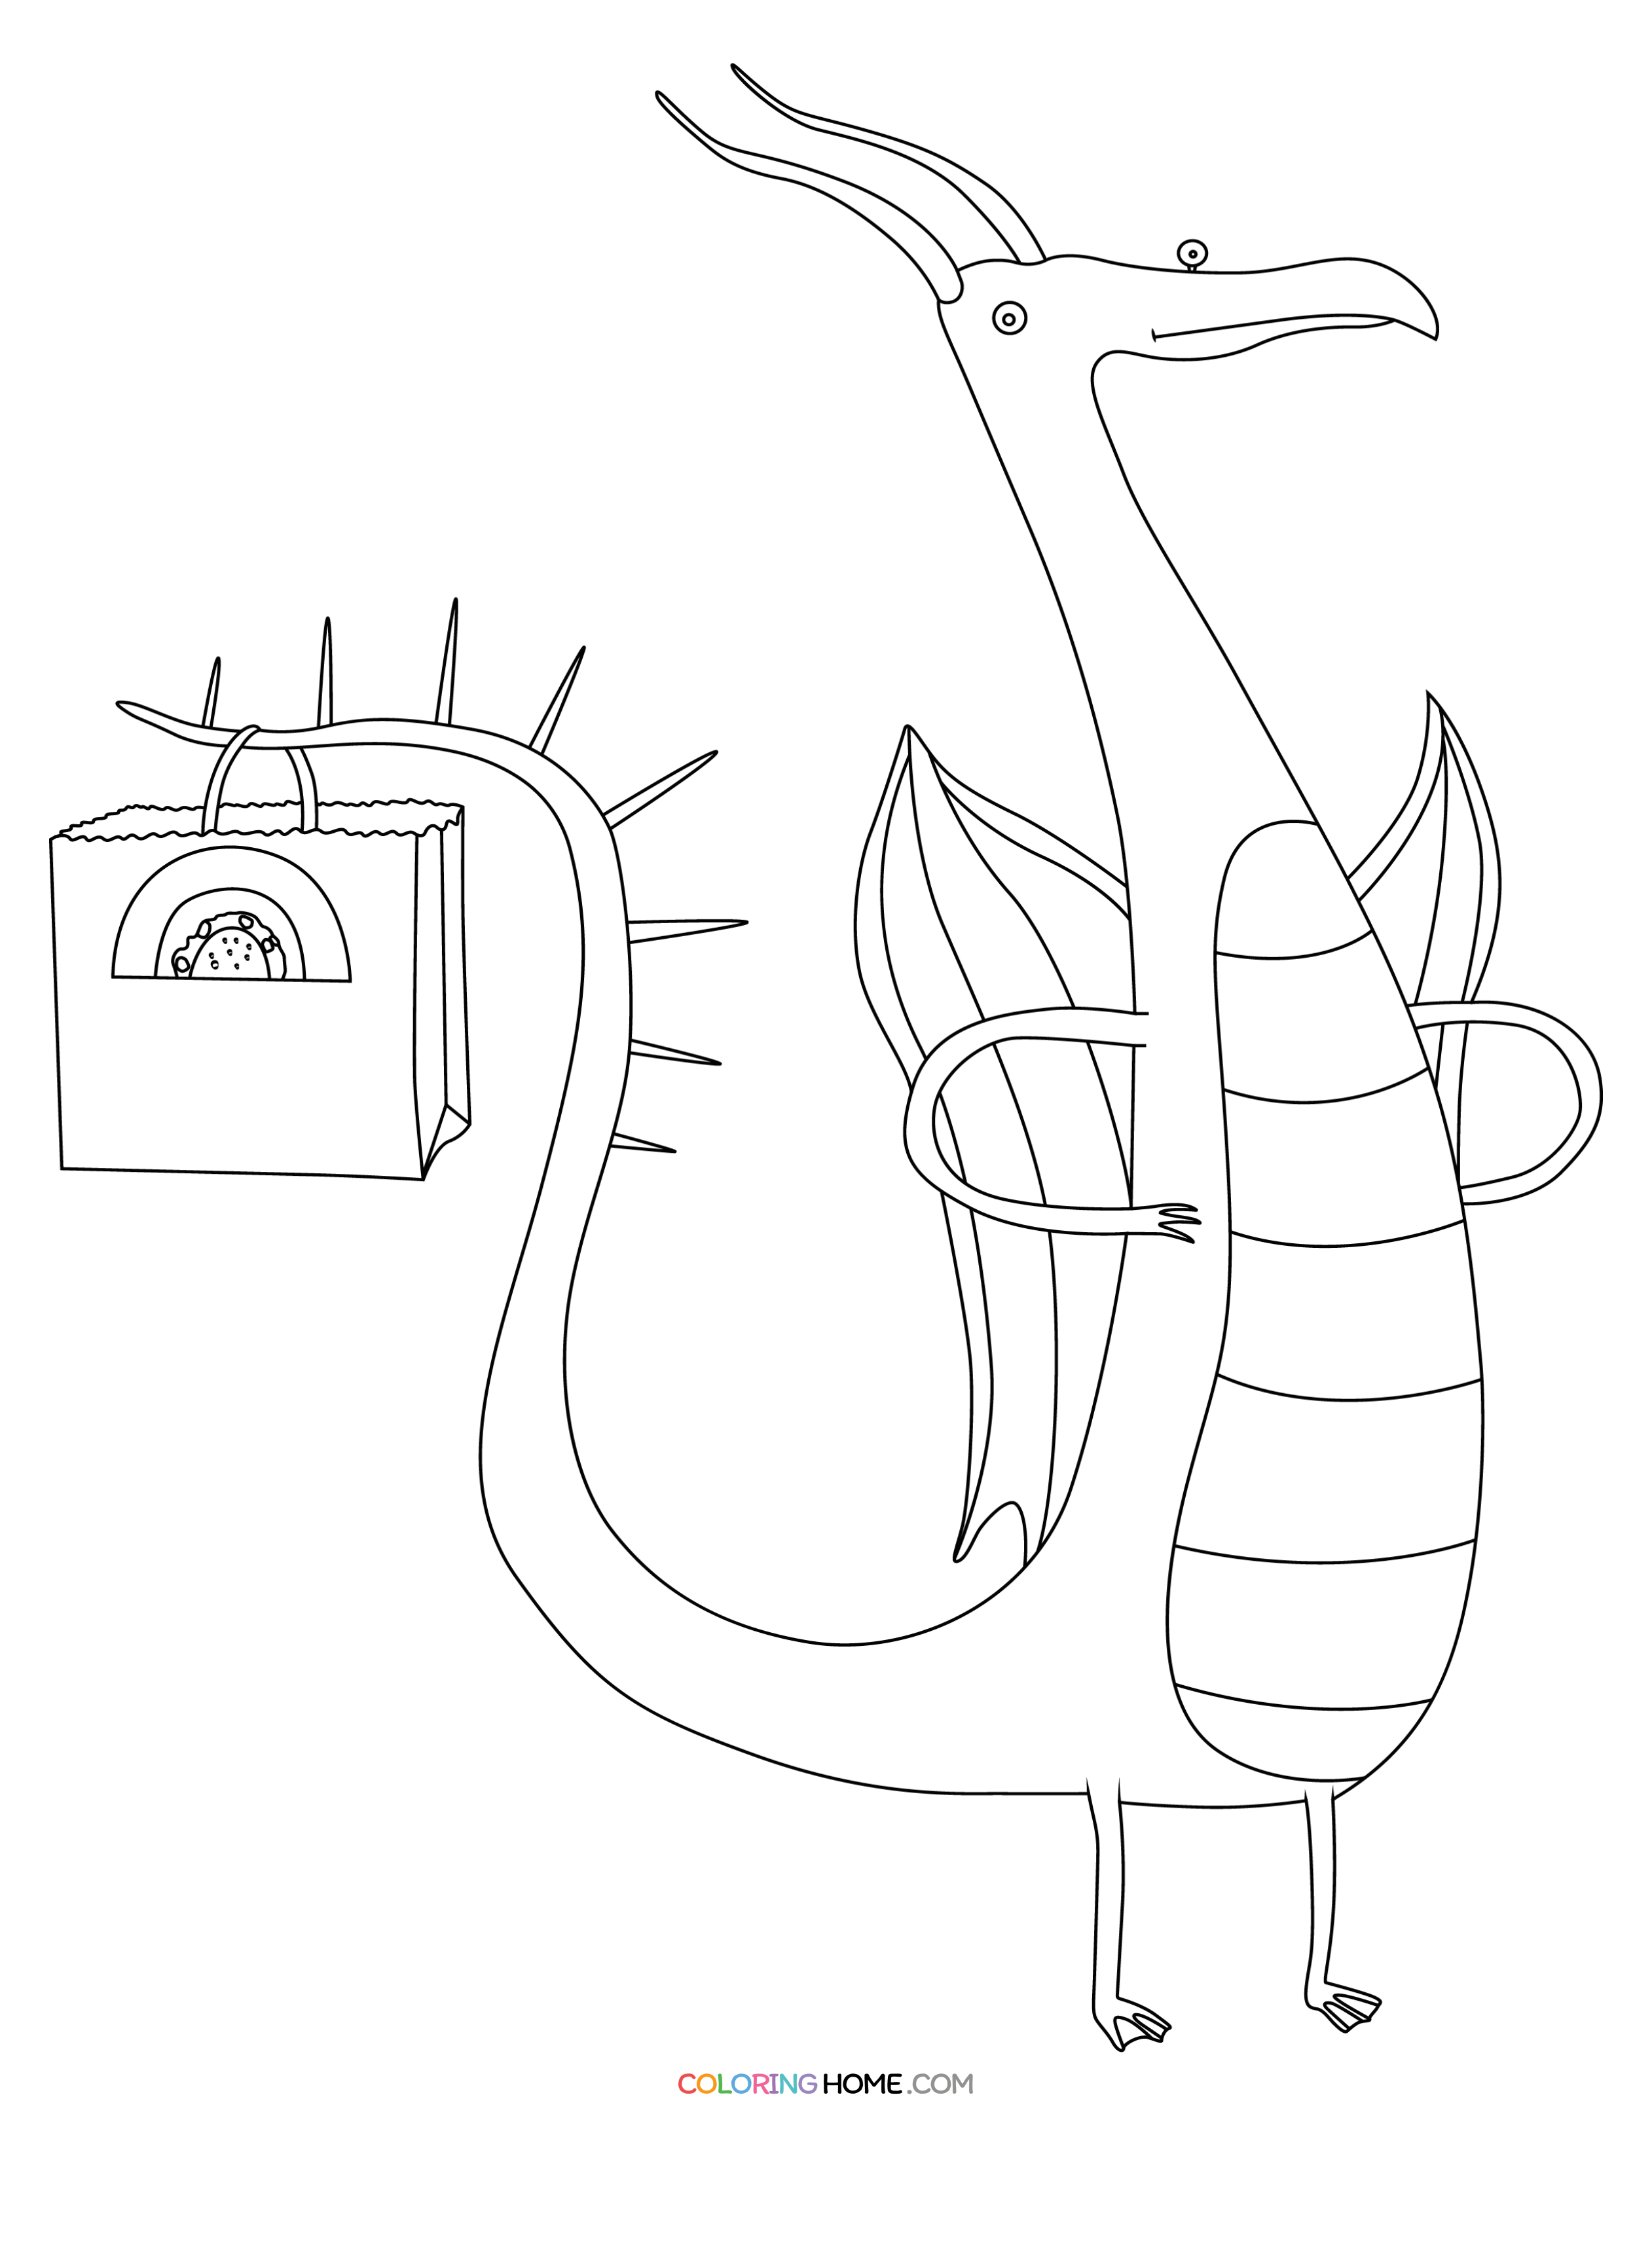 Dragons Love Tacos coloring page